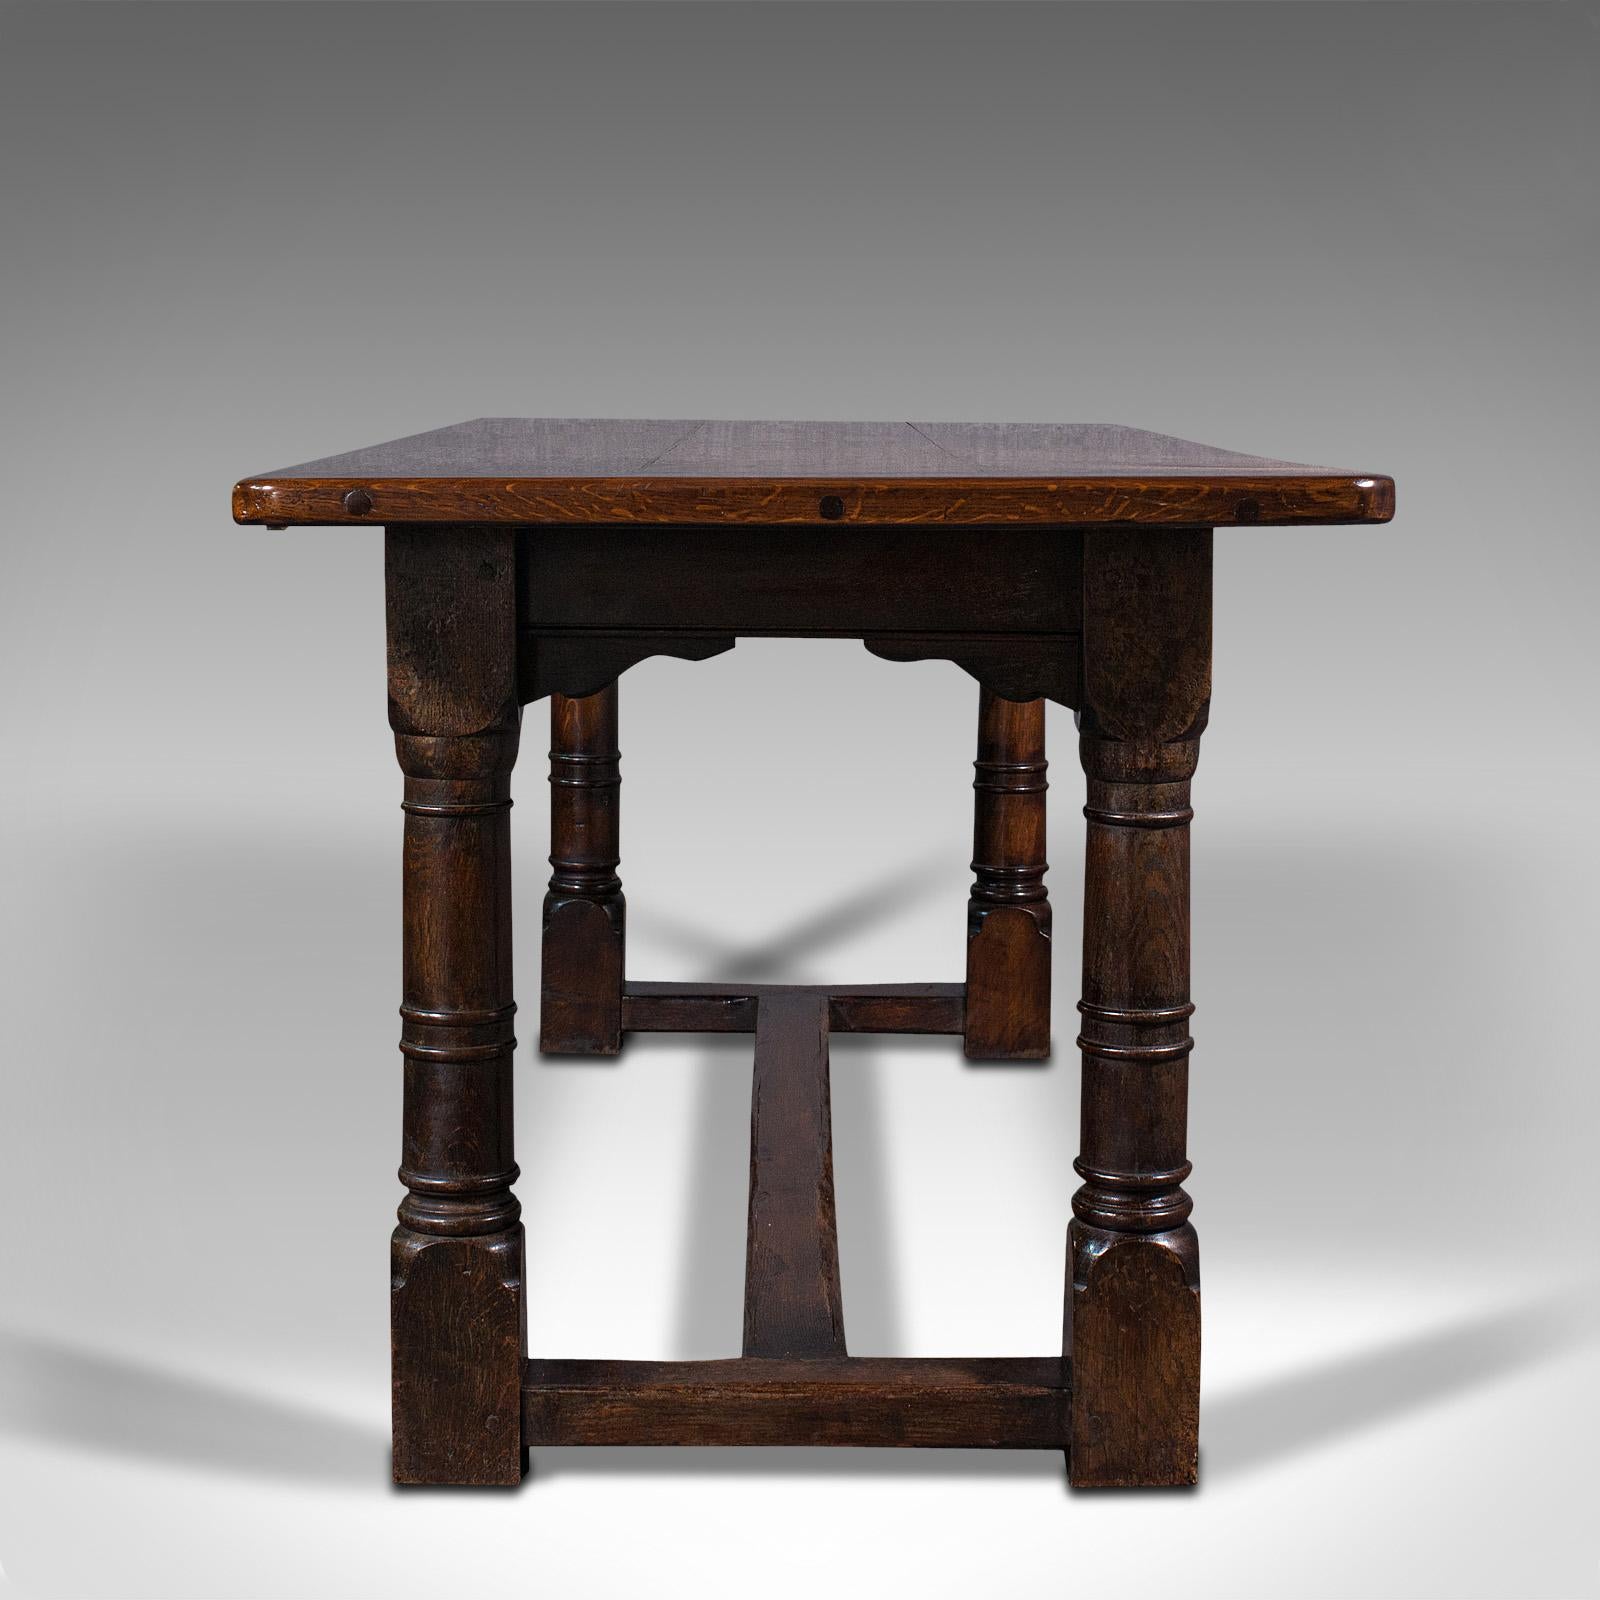 British Antique Refectory Table, English, Oak, 6 Seat, Dining, Kitchen, Victorian, 1880